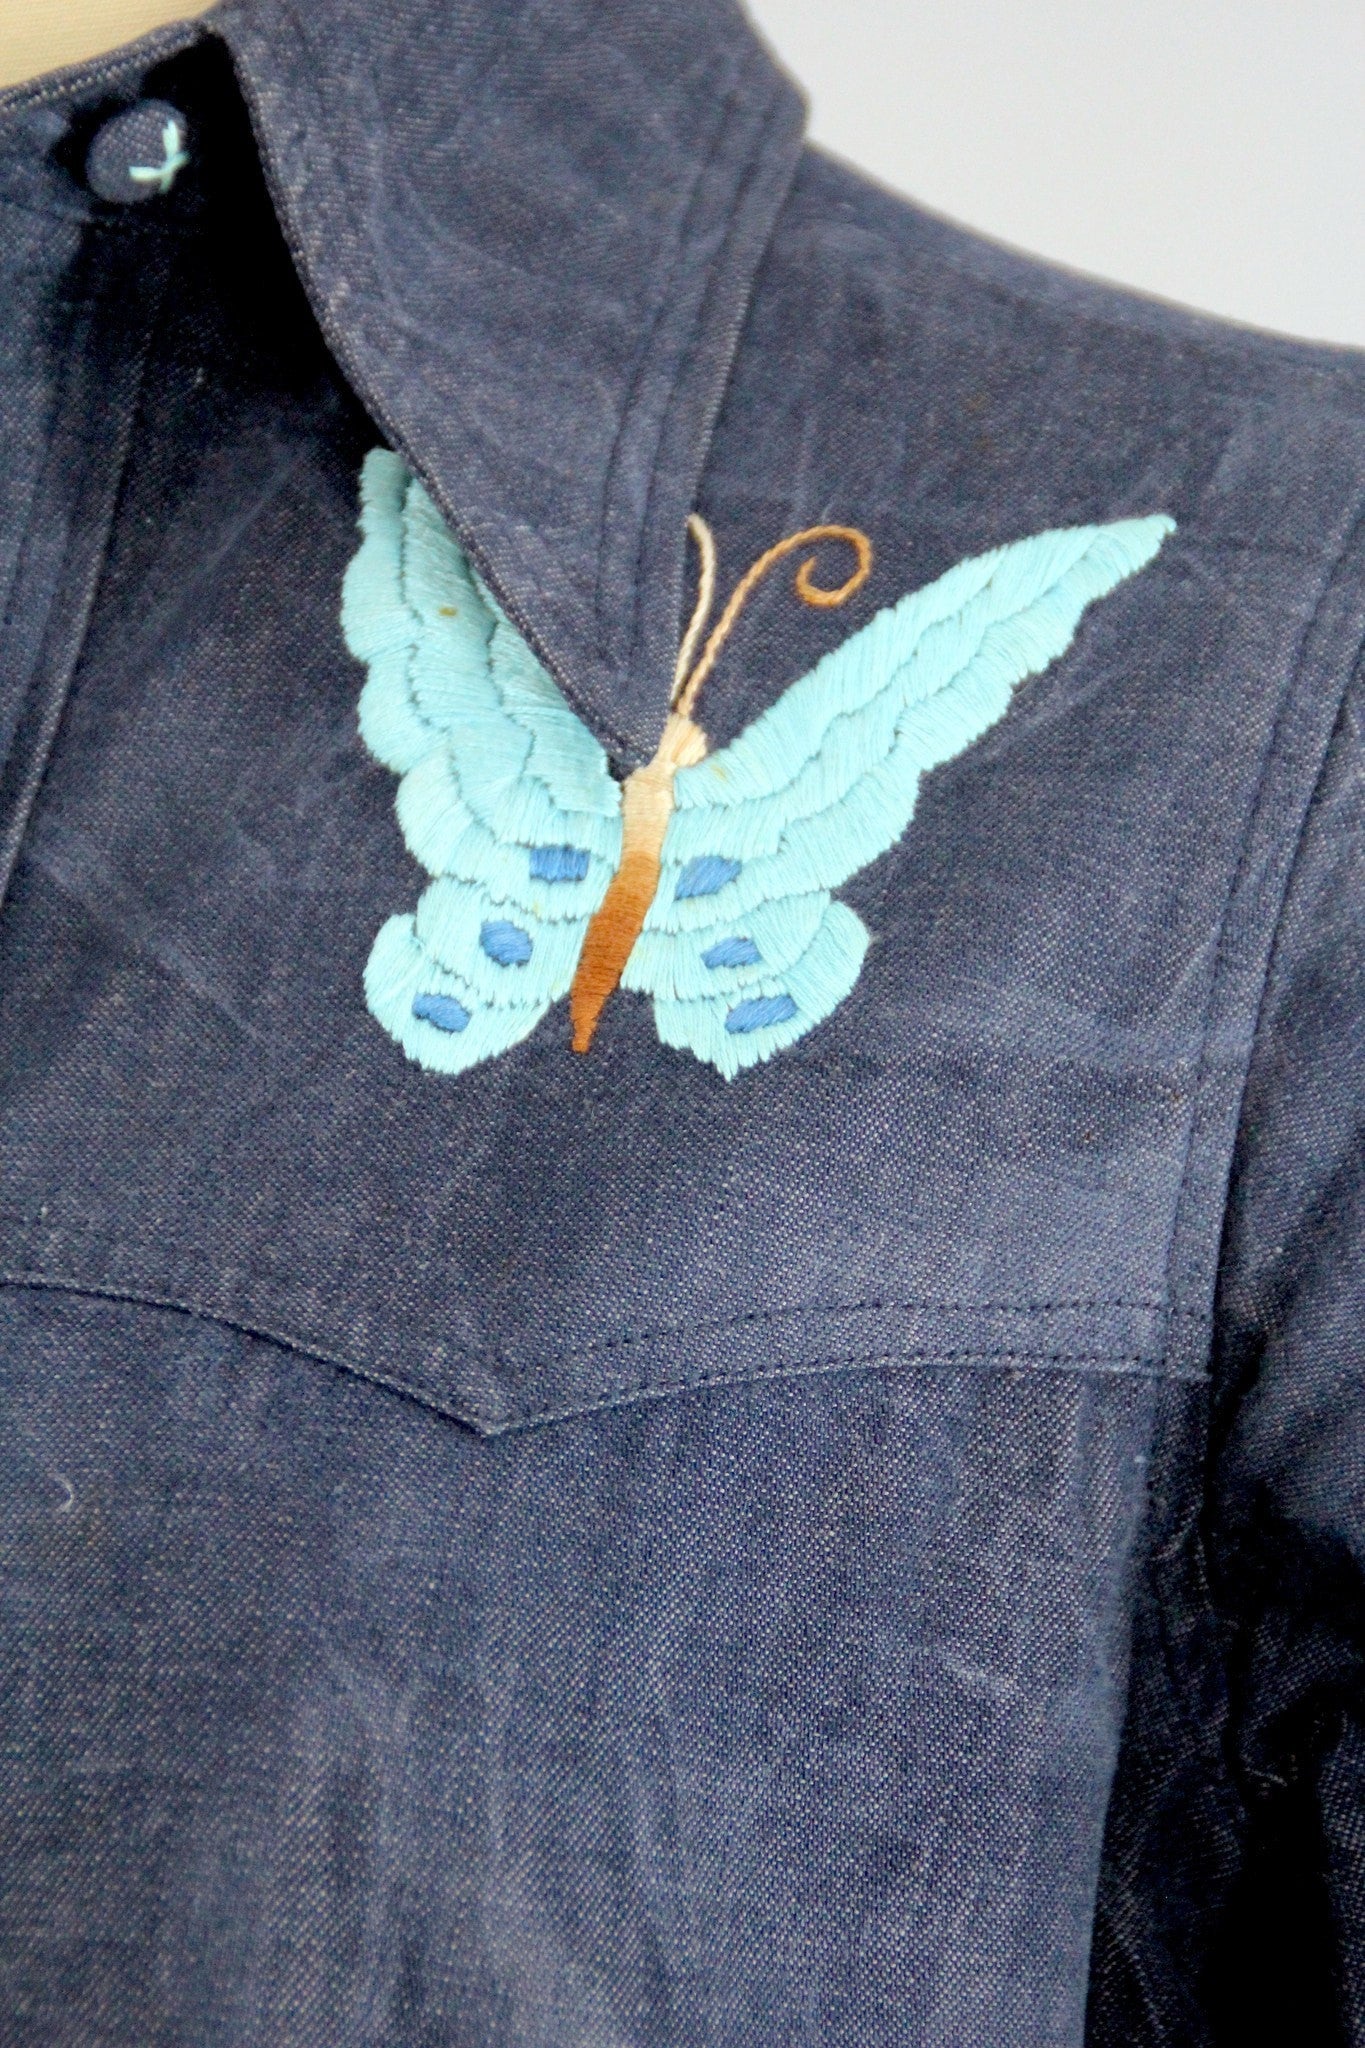 Vintage 1970s Denim Shirt with Embroidered Butterfly - ThisBlueBird